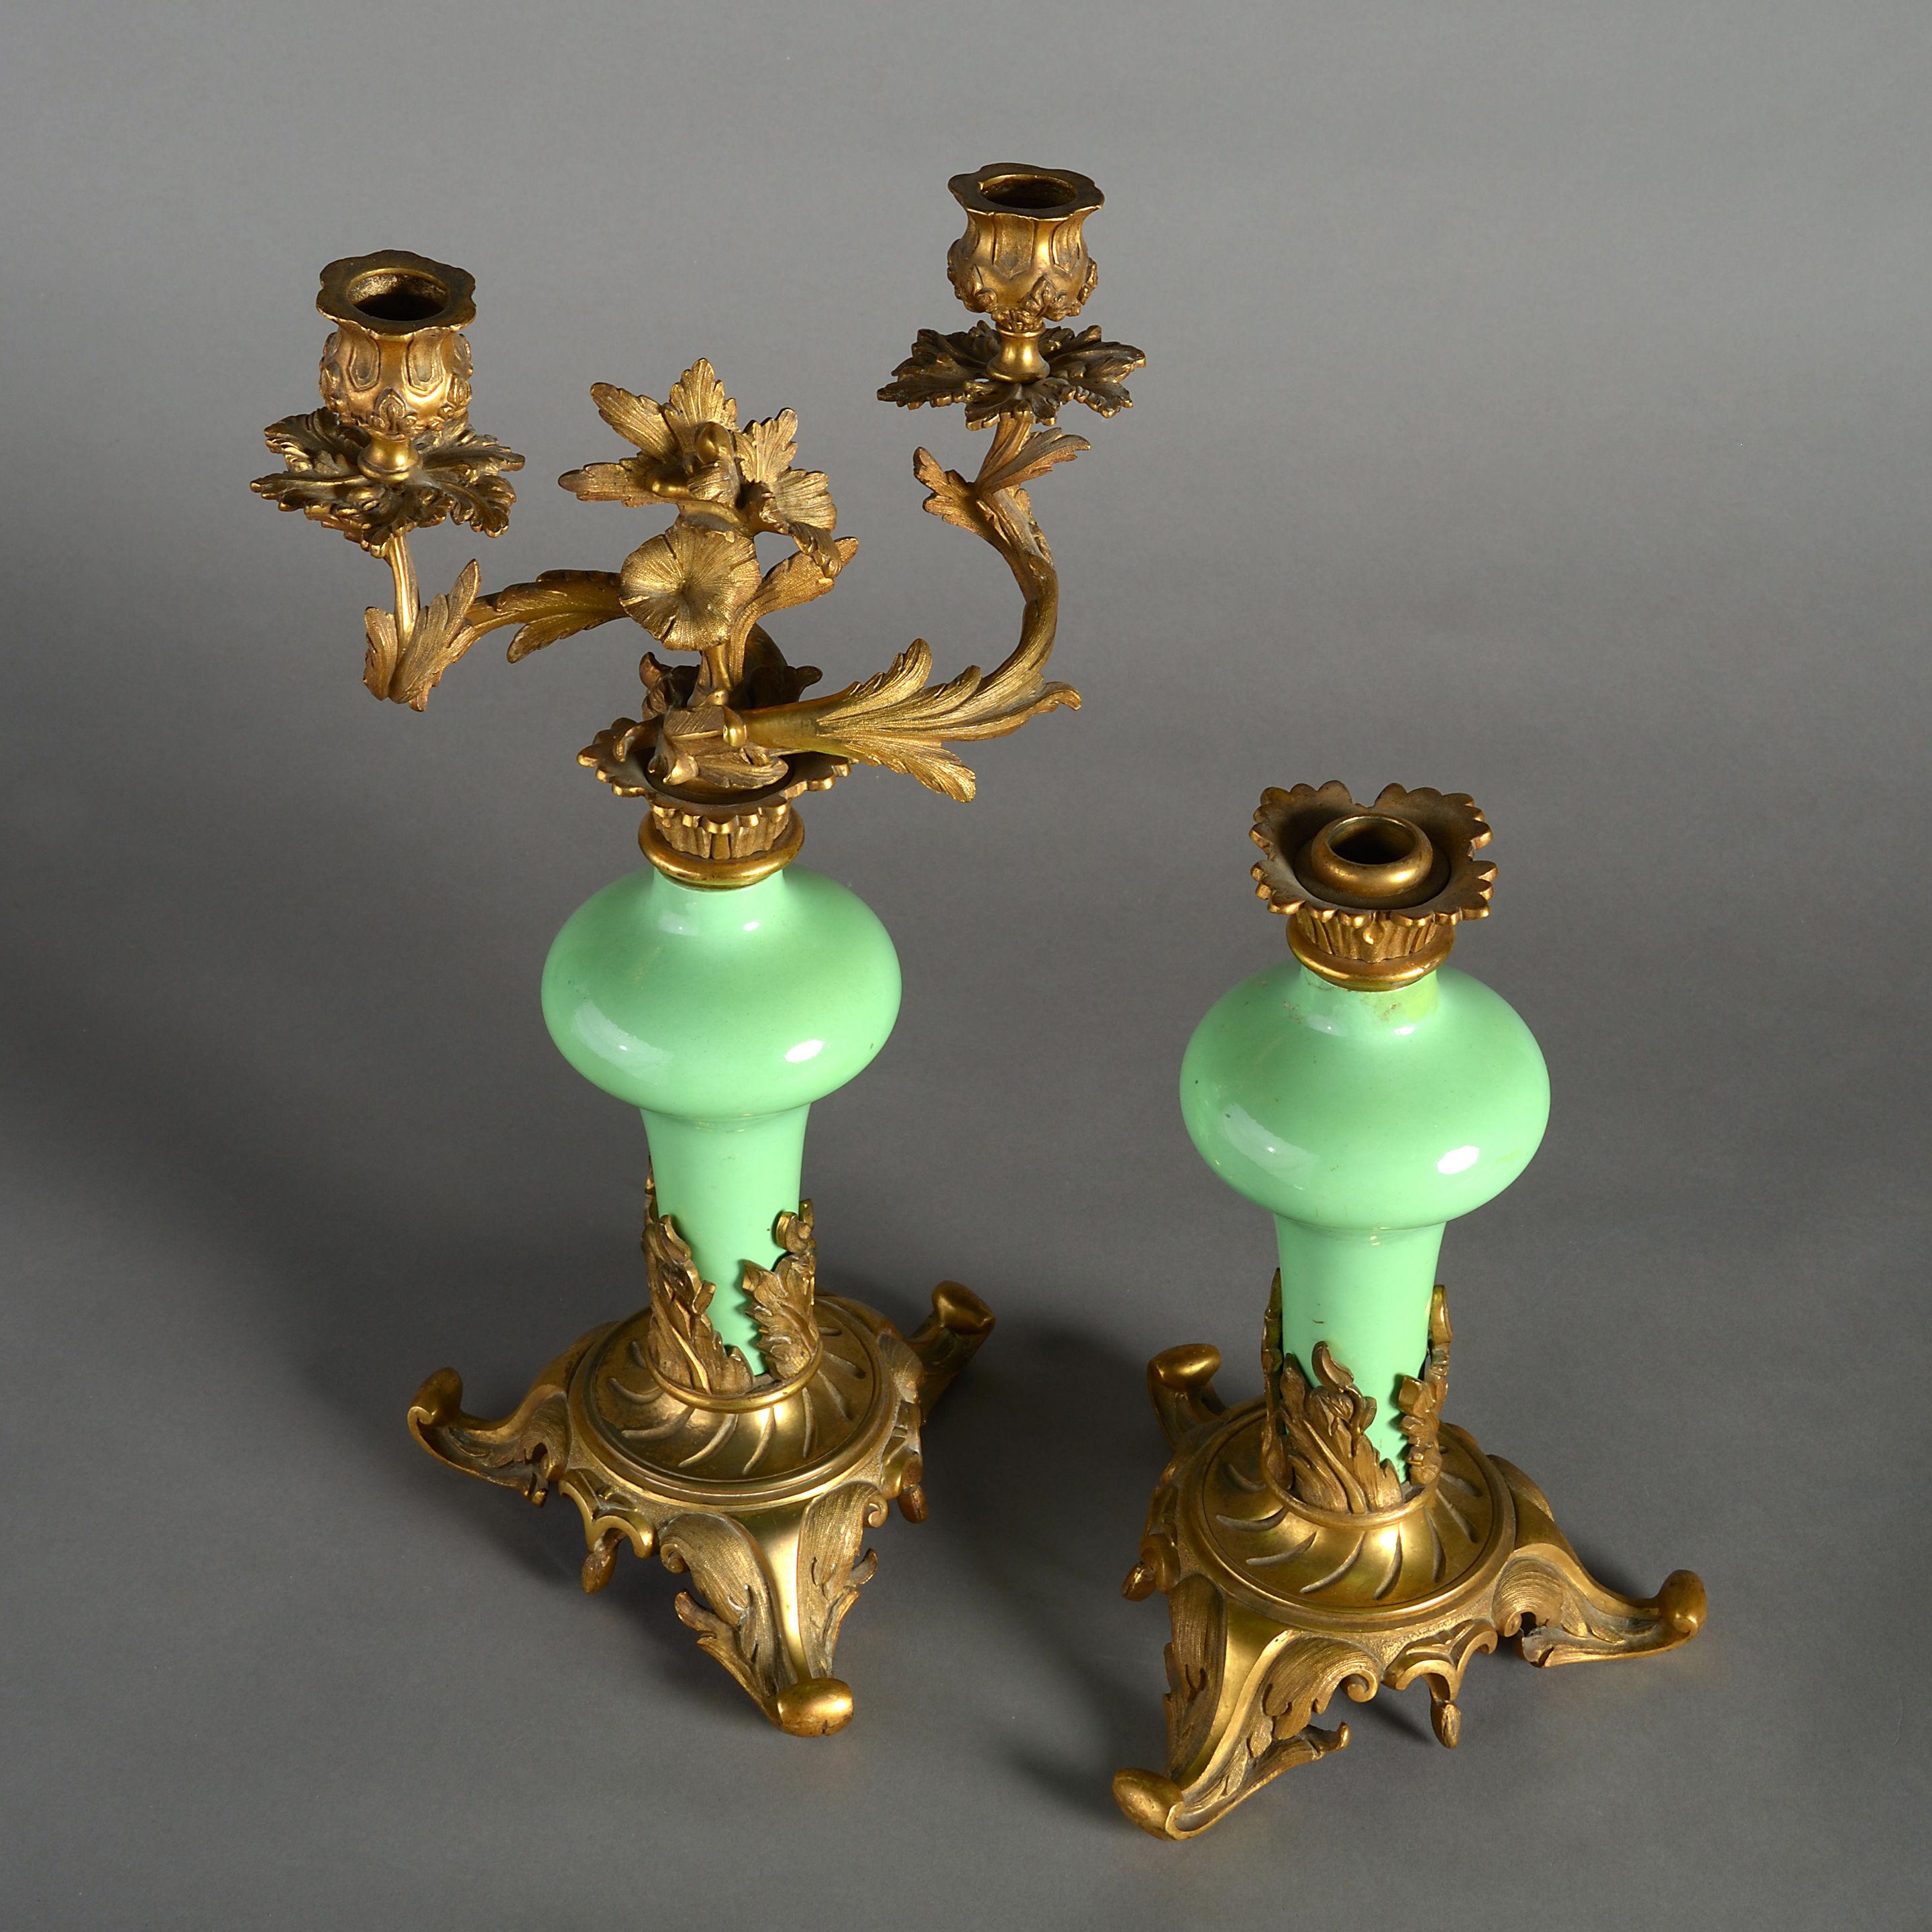 French Pair of 19th Century Rococo Porcelain and Ormolu Candelabra